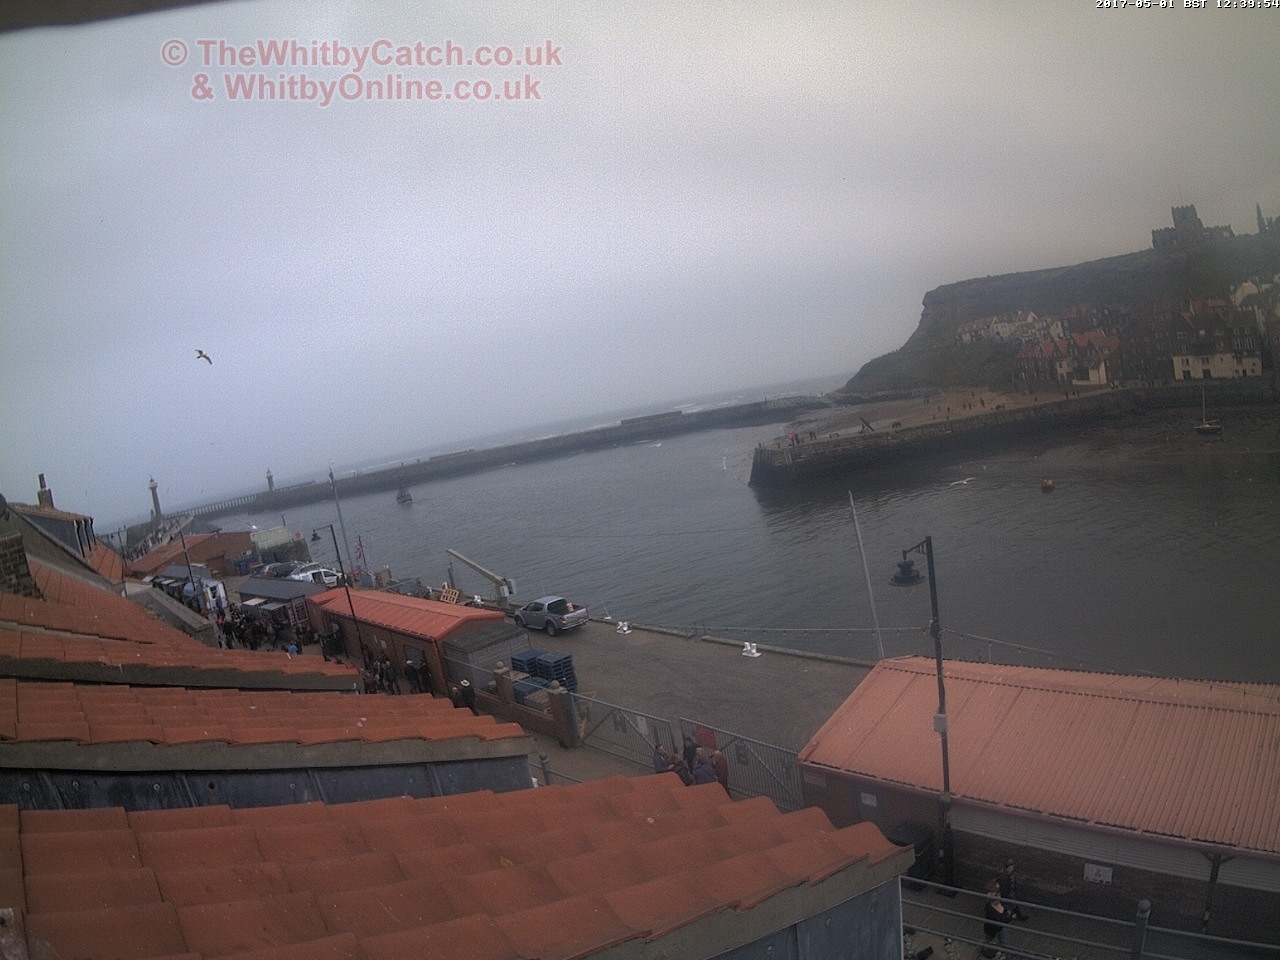 Whitby Mon 1st May 2017 12:40.